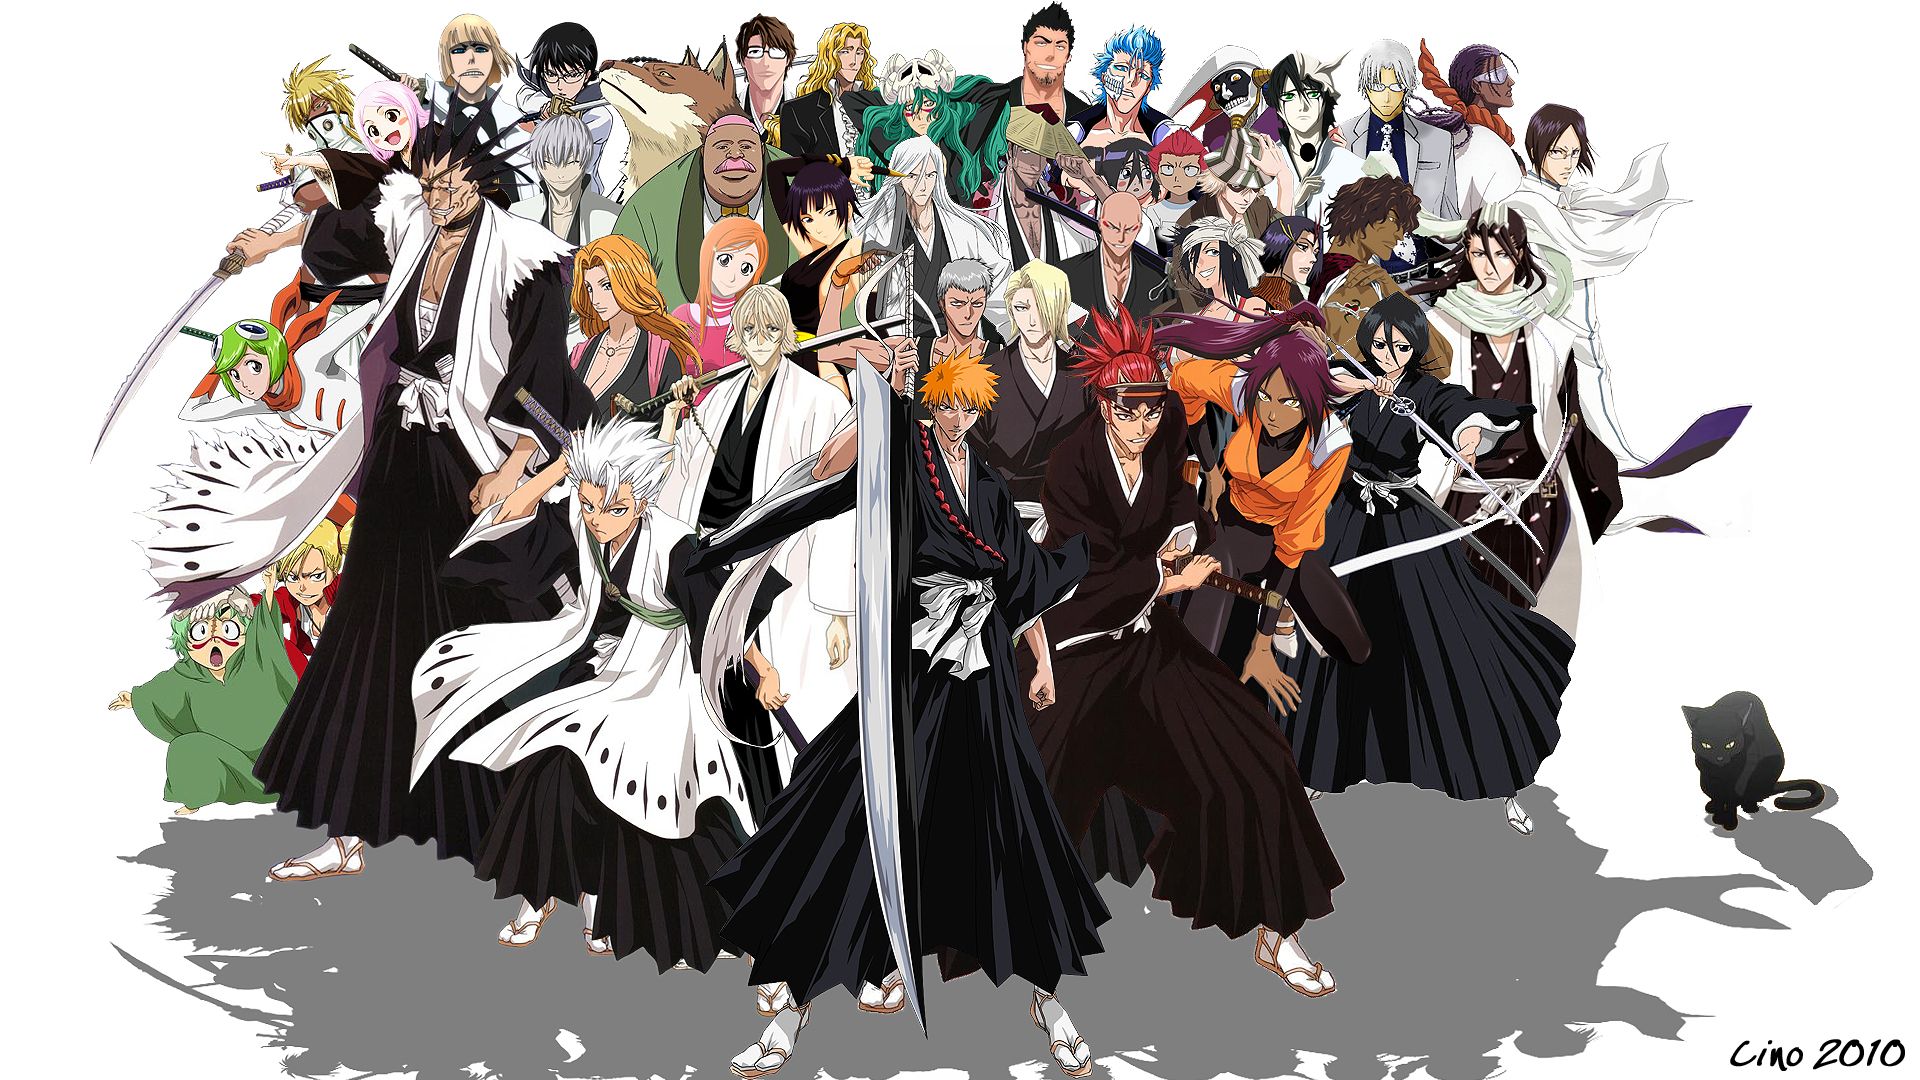 1920x1080px Wallpaper Bleach All Characters